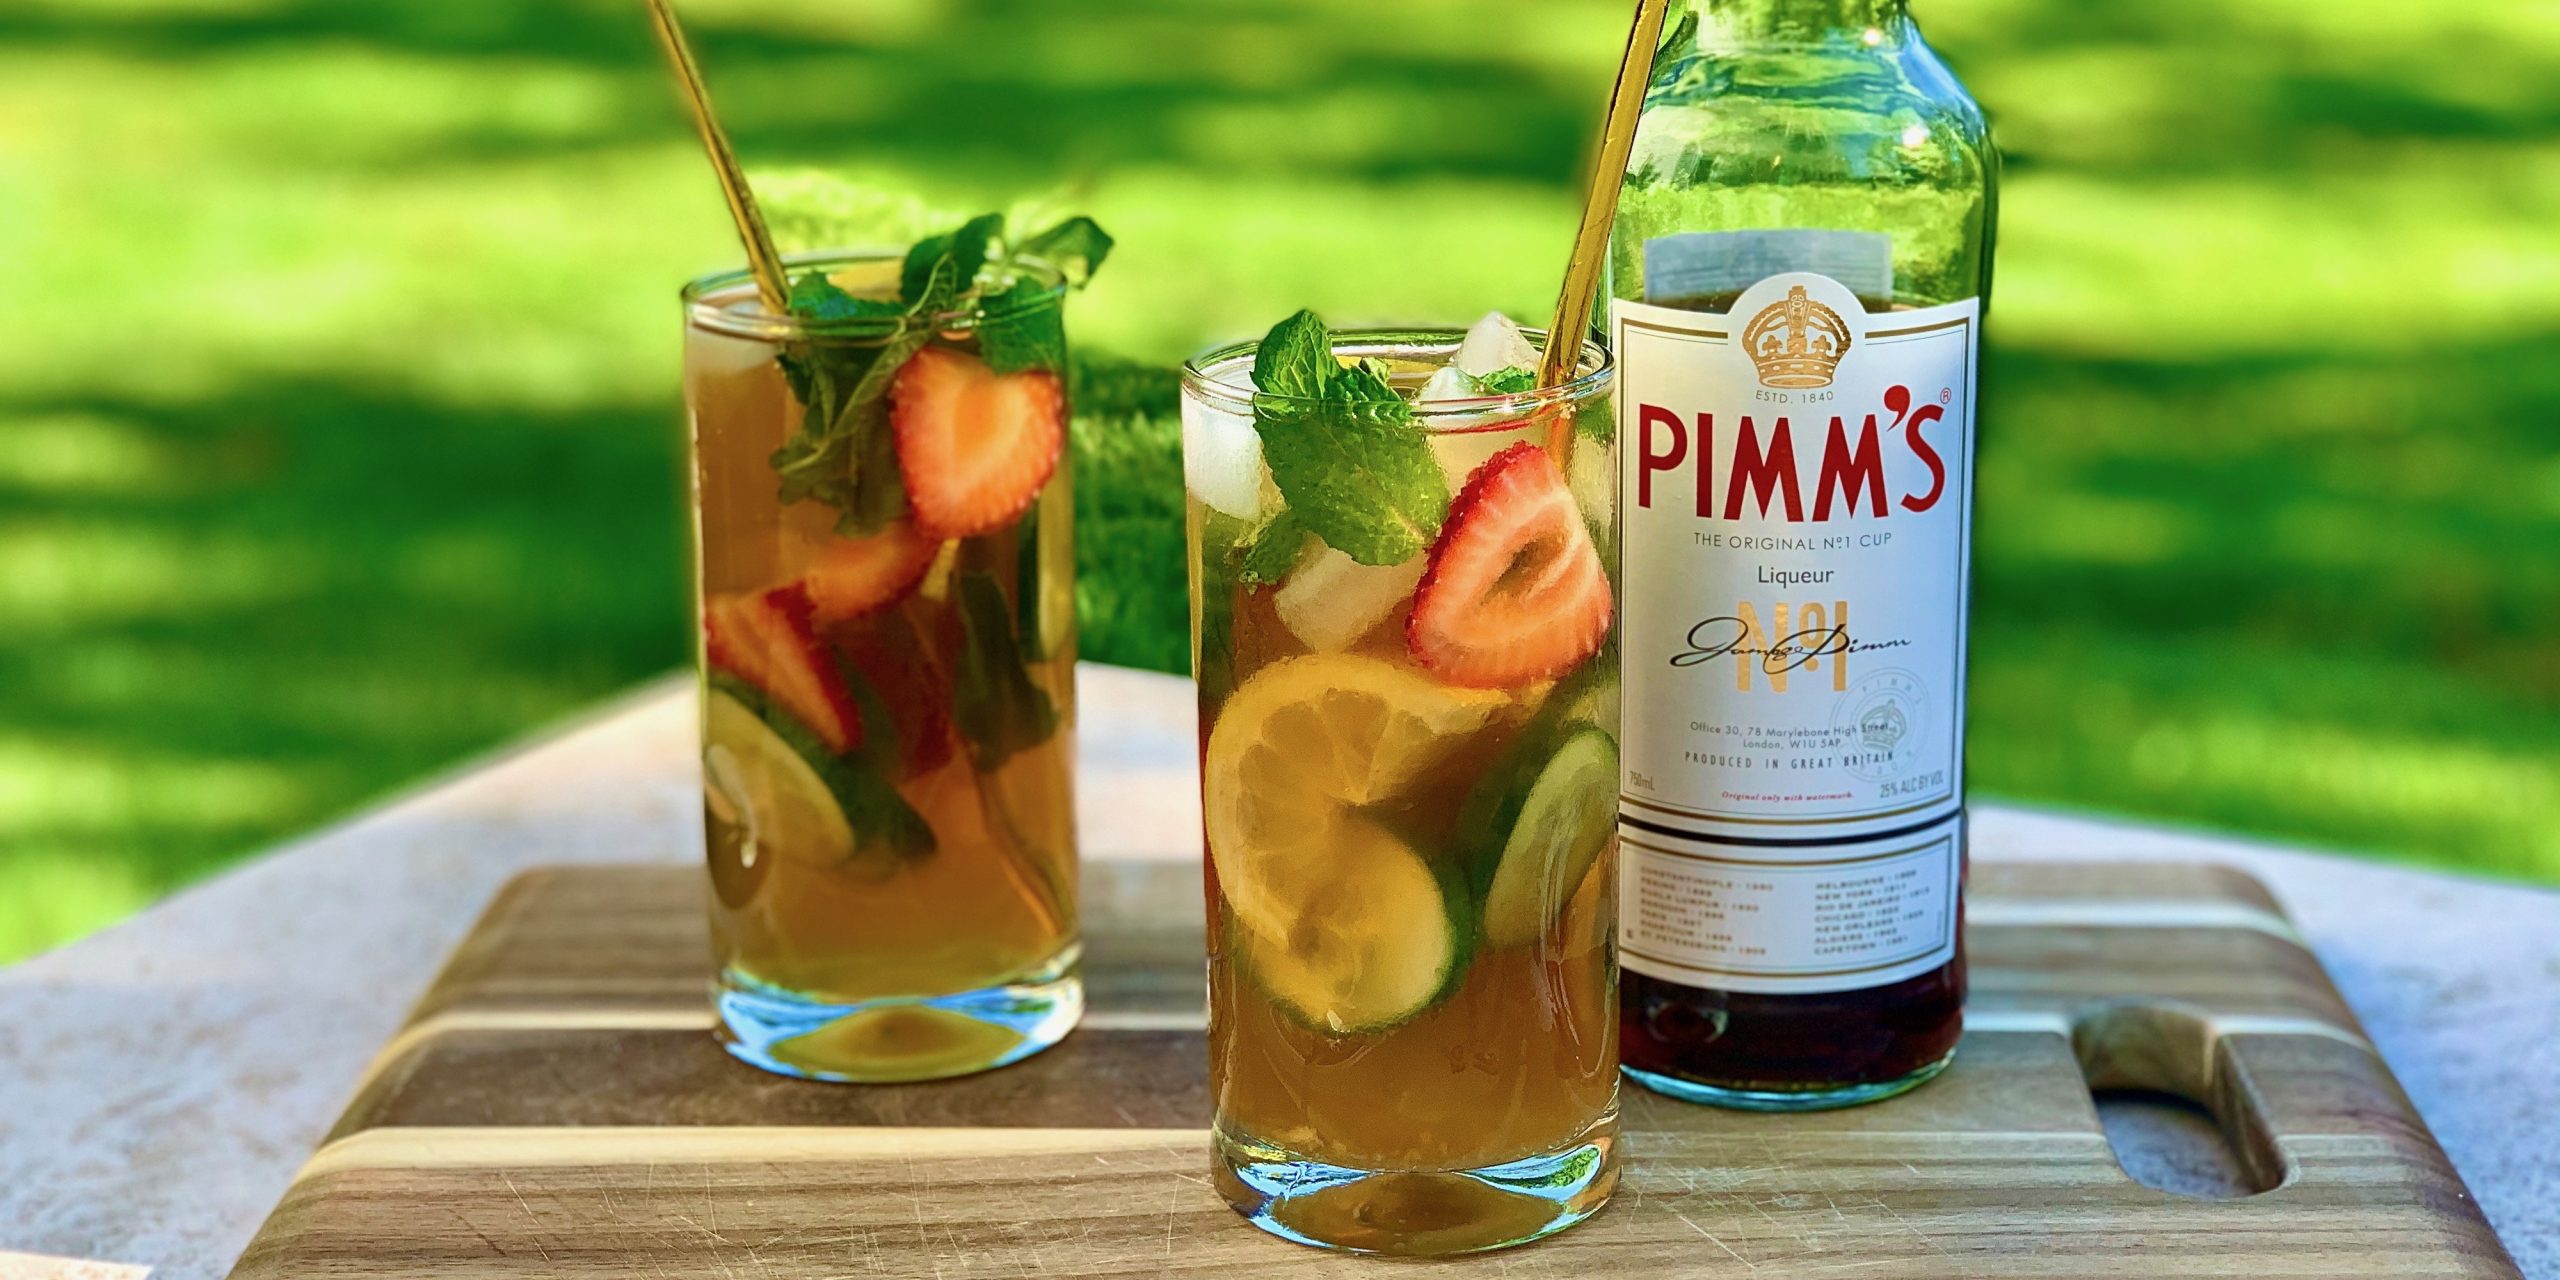 Pimm's - Source: TODAY